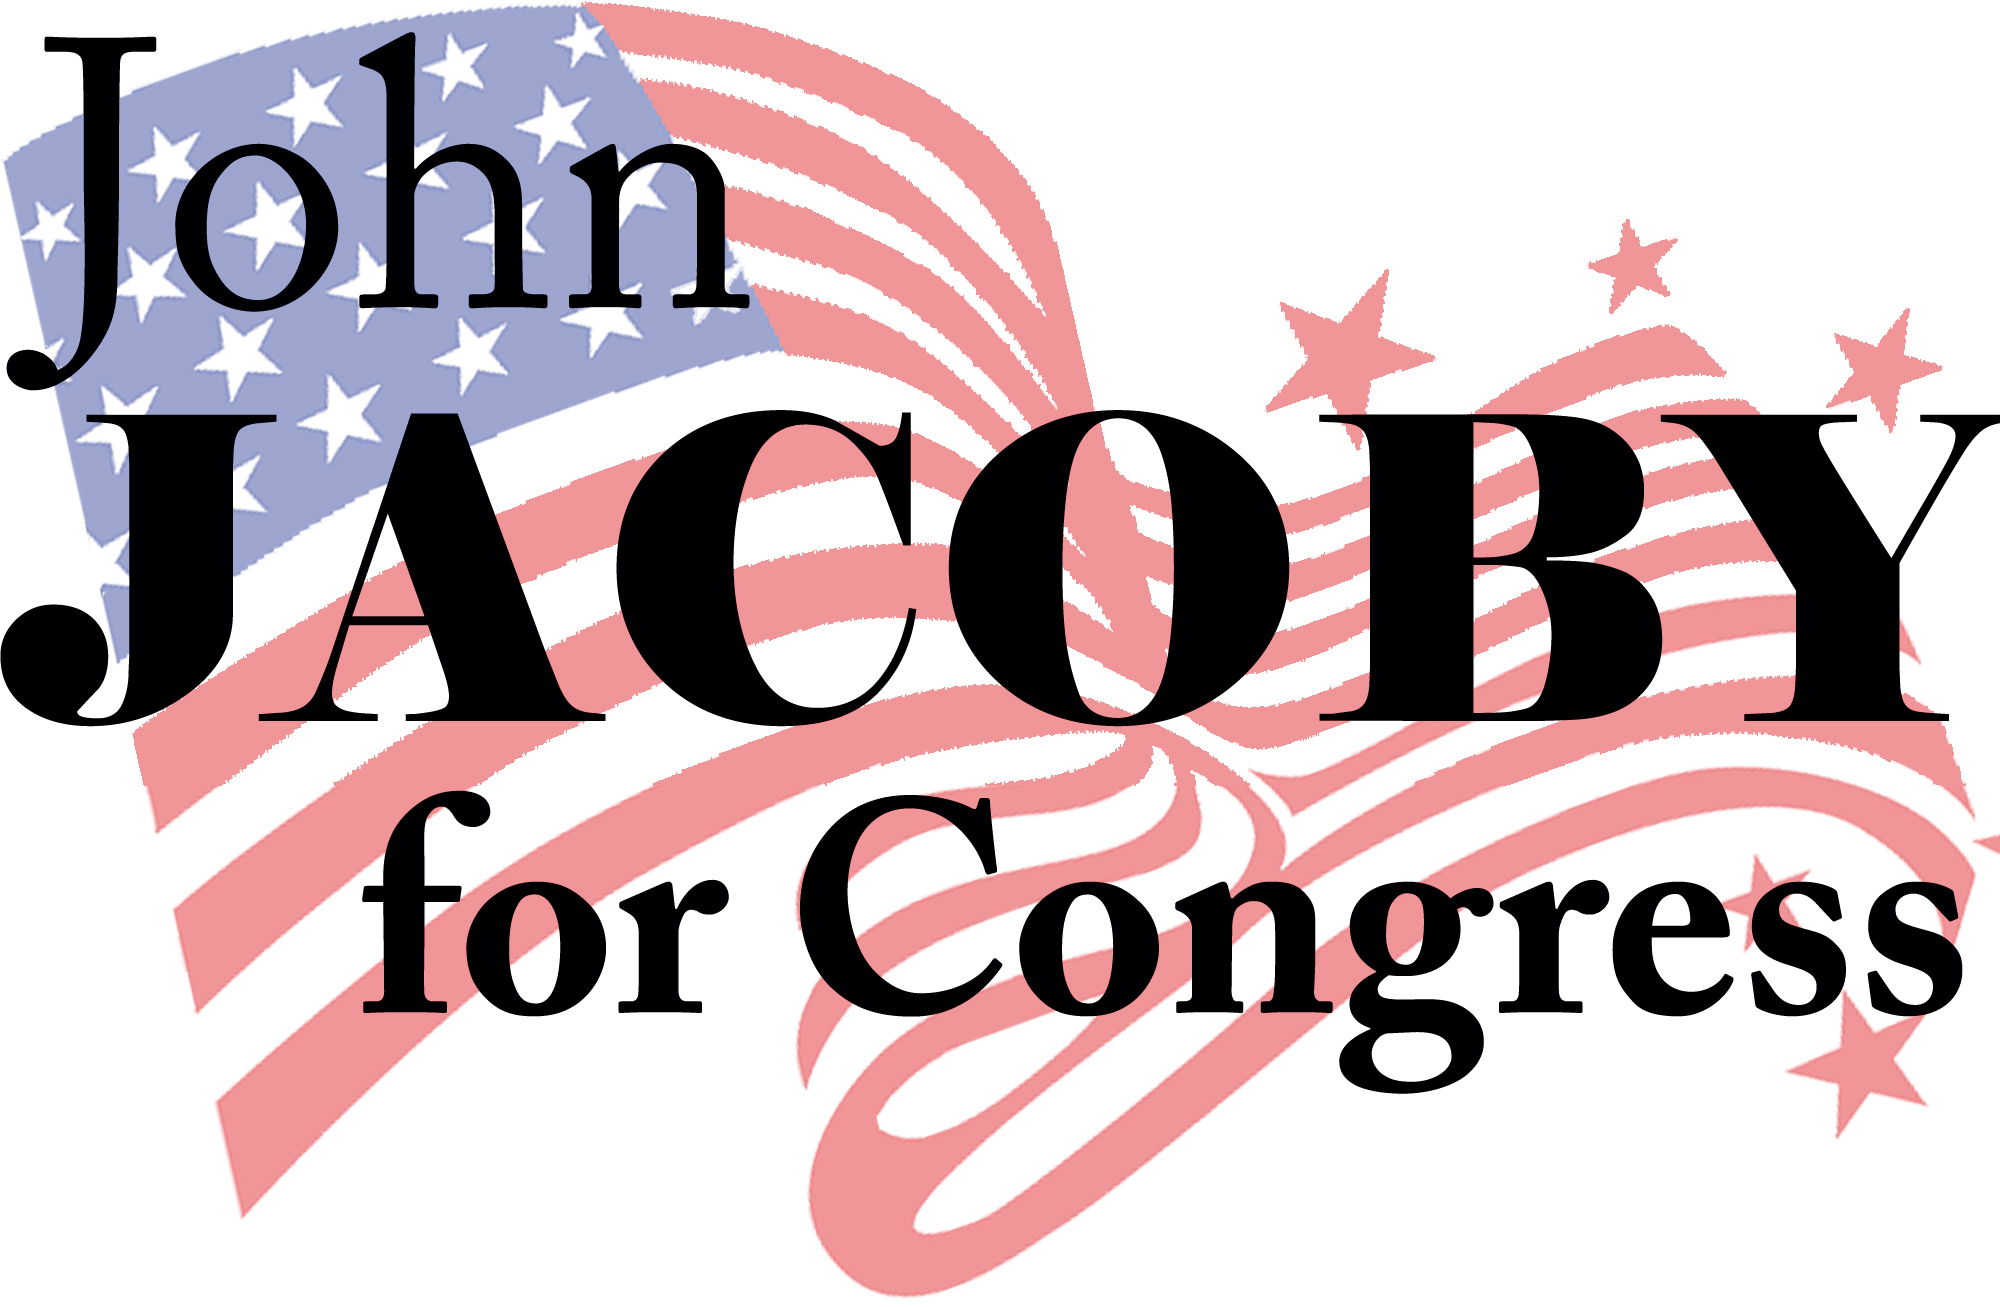 John Jacoby for Congress